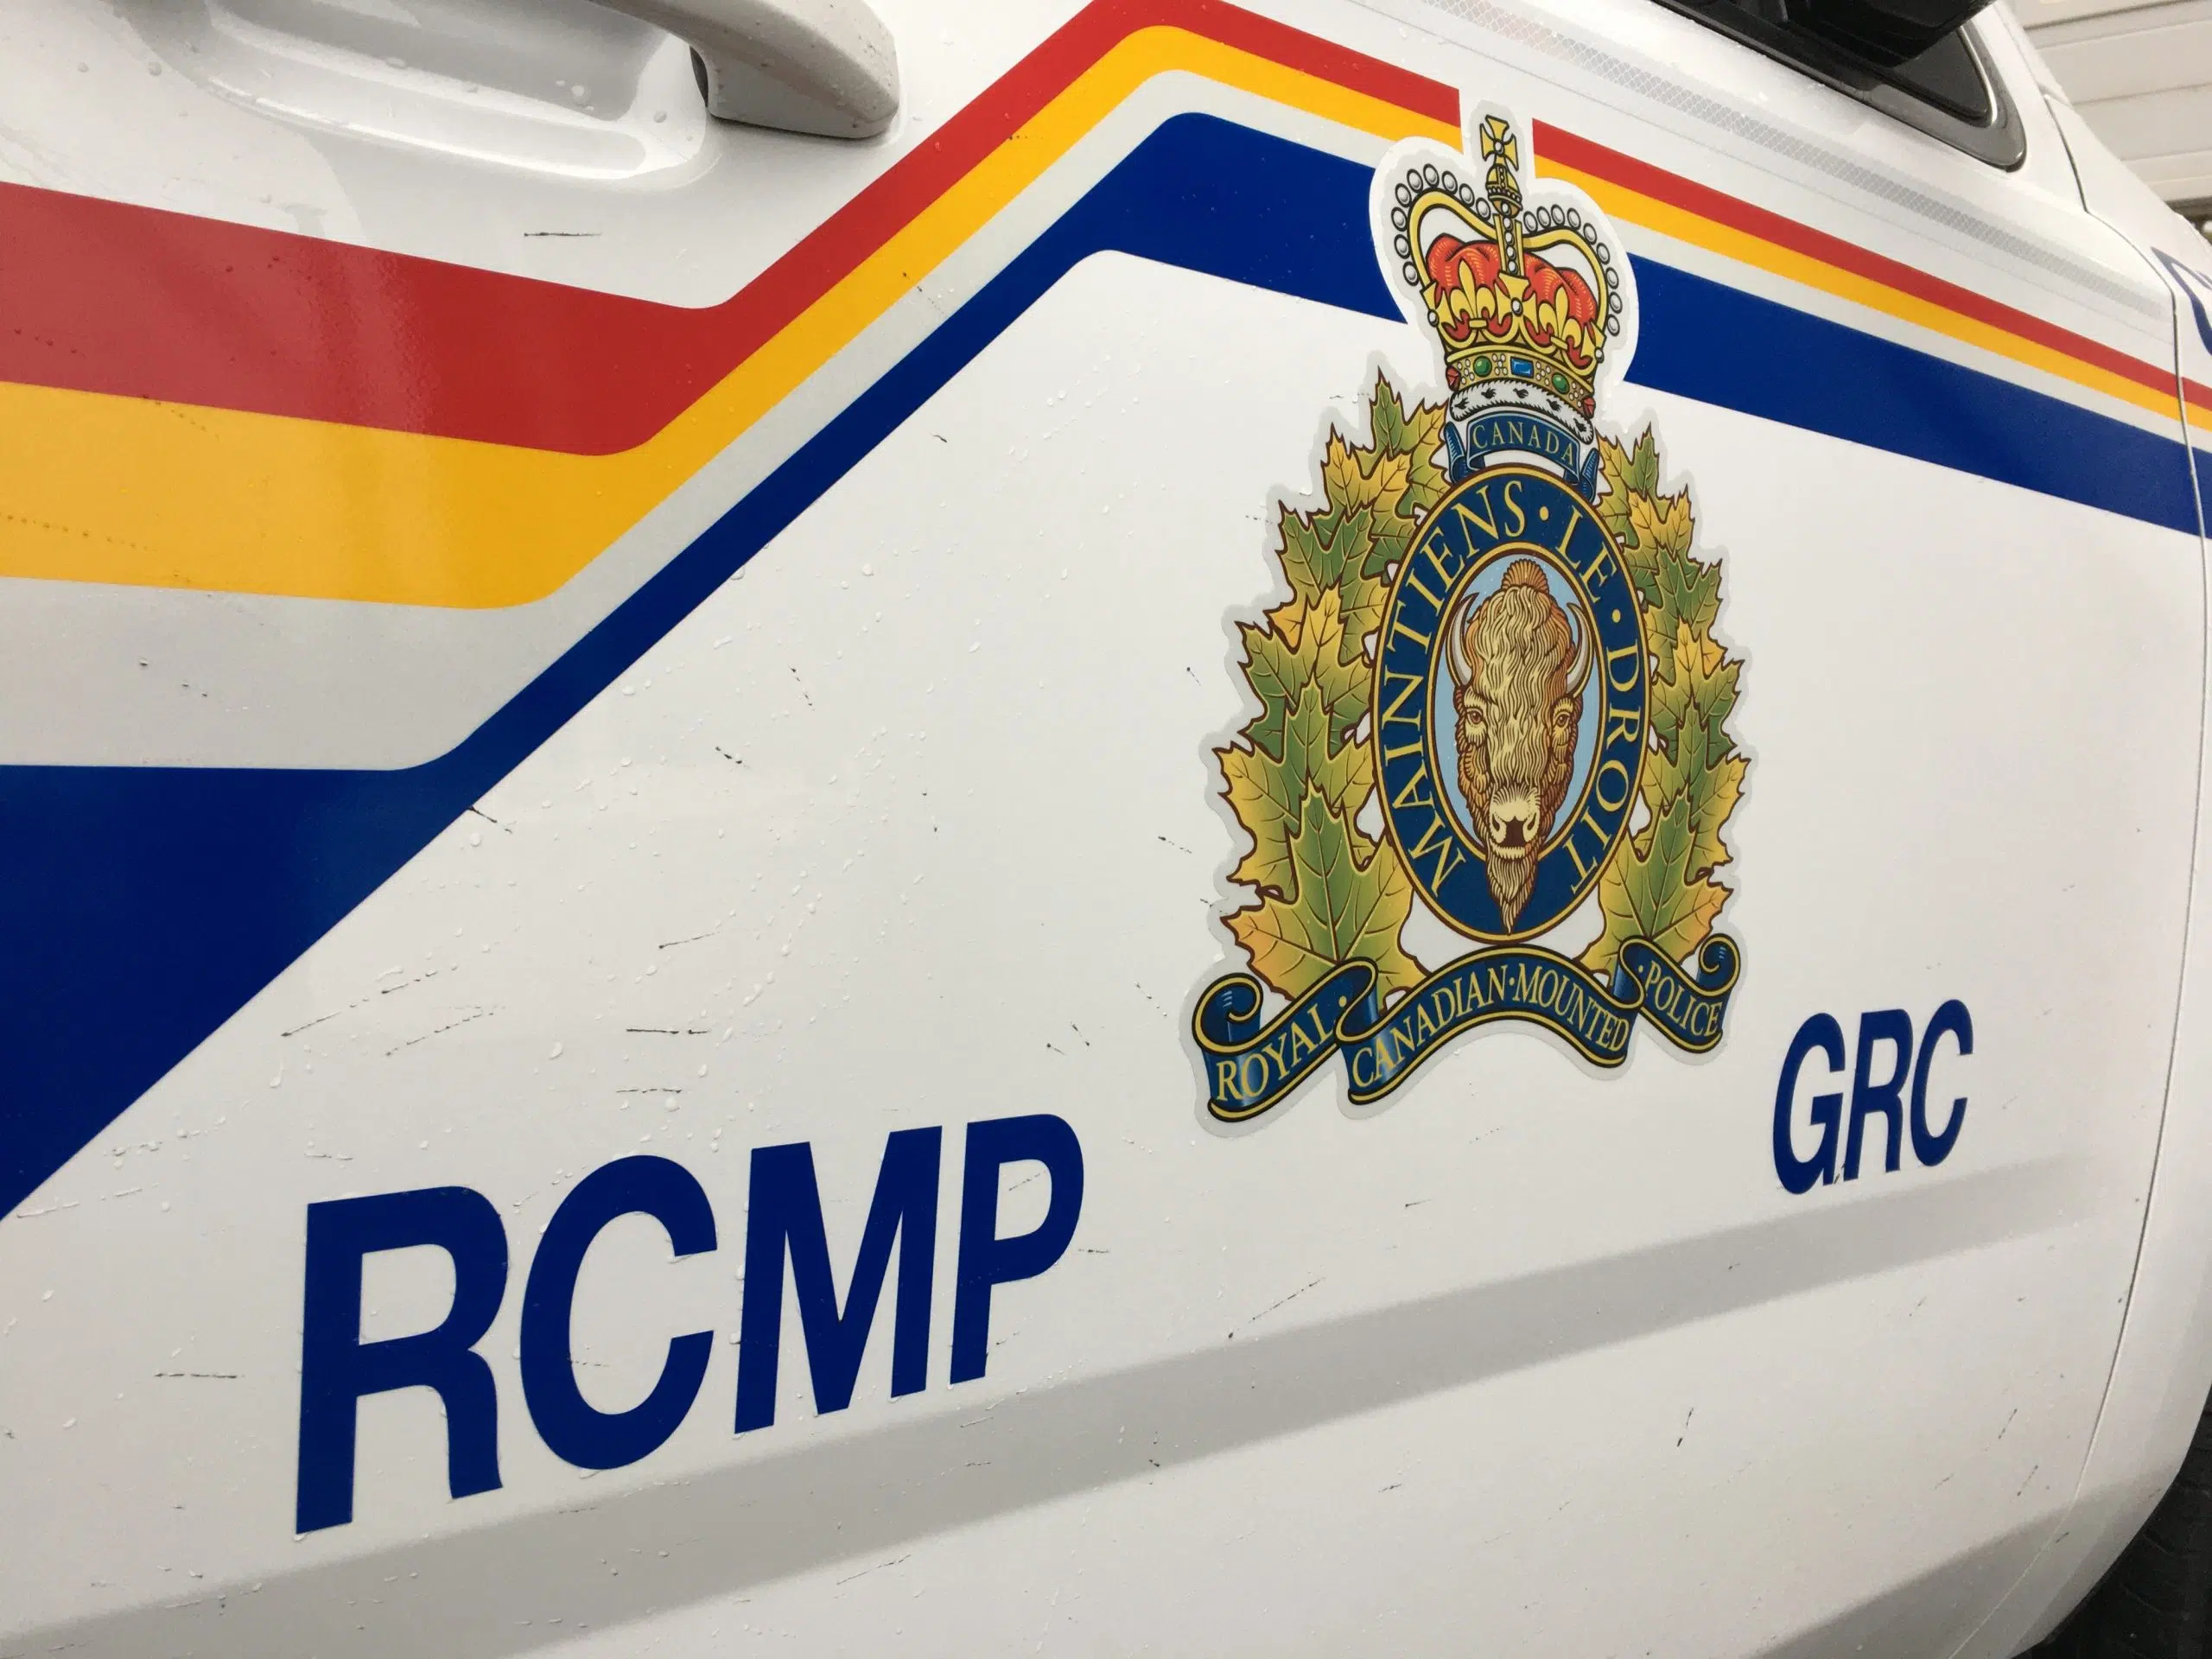 RCMP now investigating third homicide in Naramata, after two Kamloops brothers found killed last month